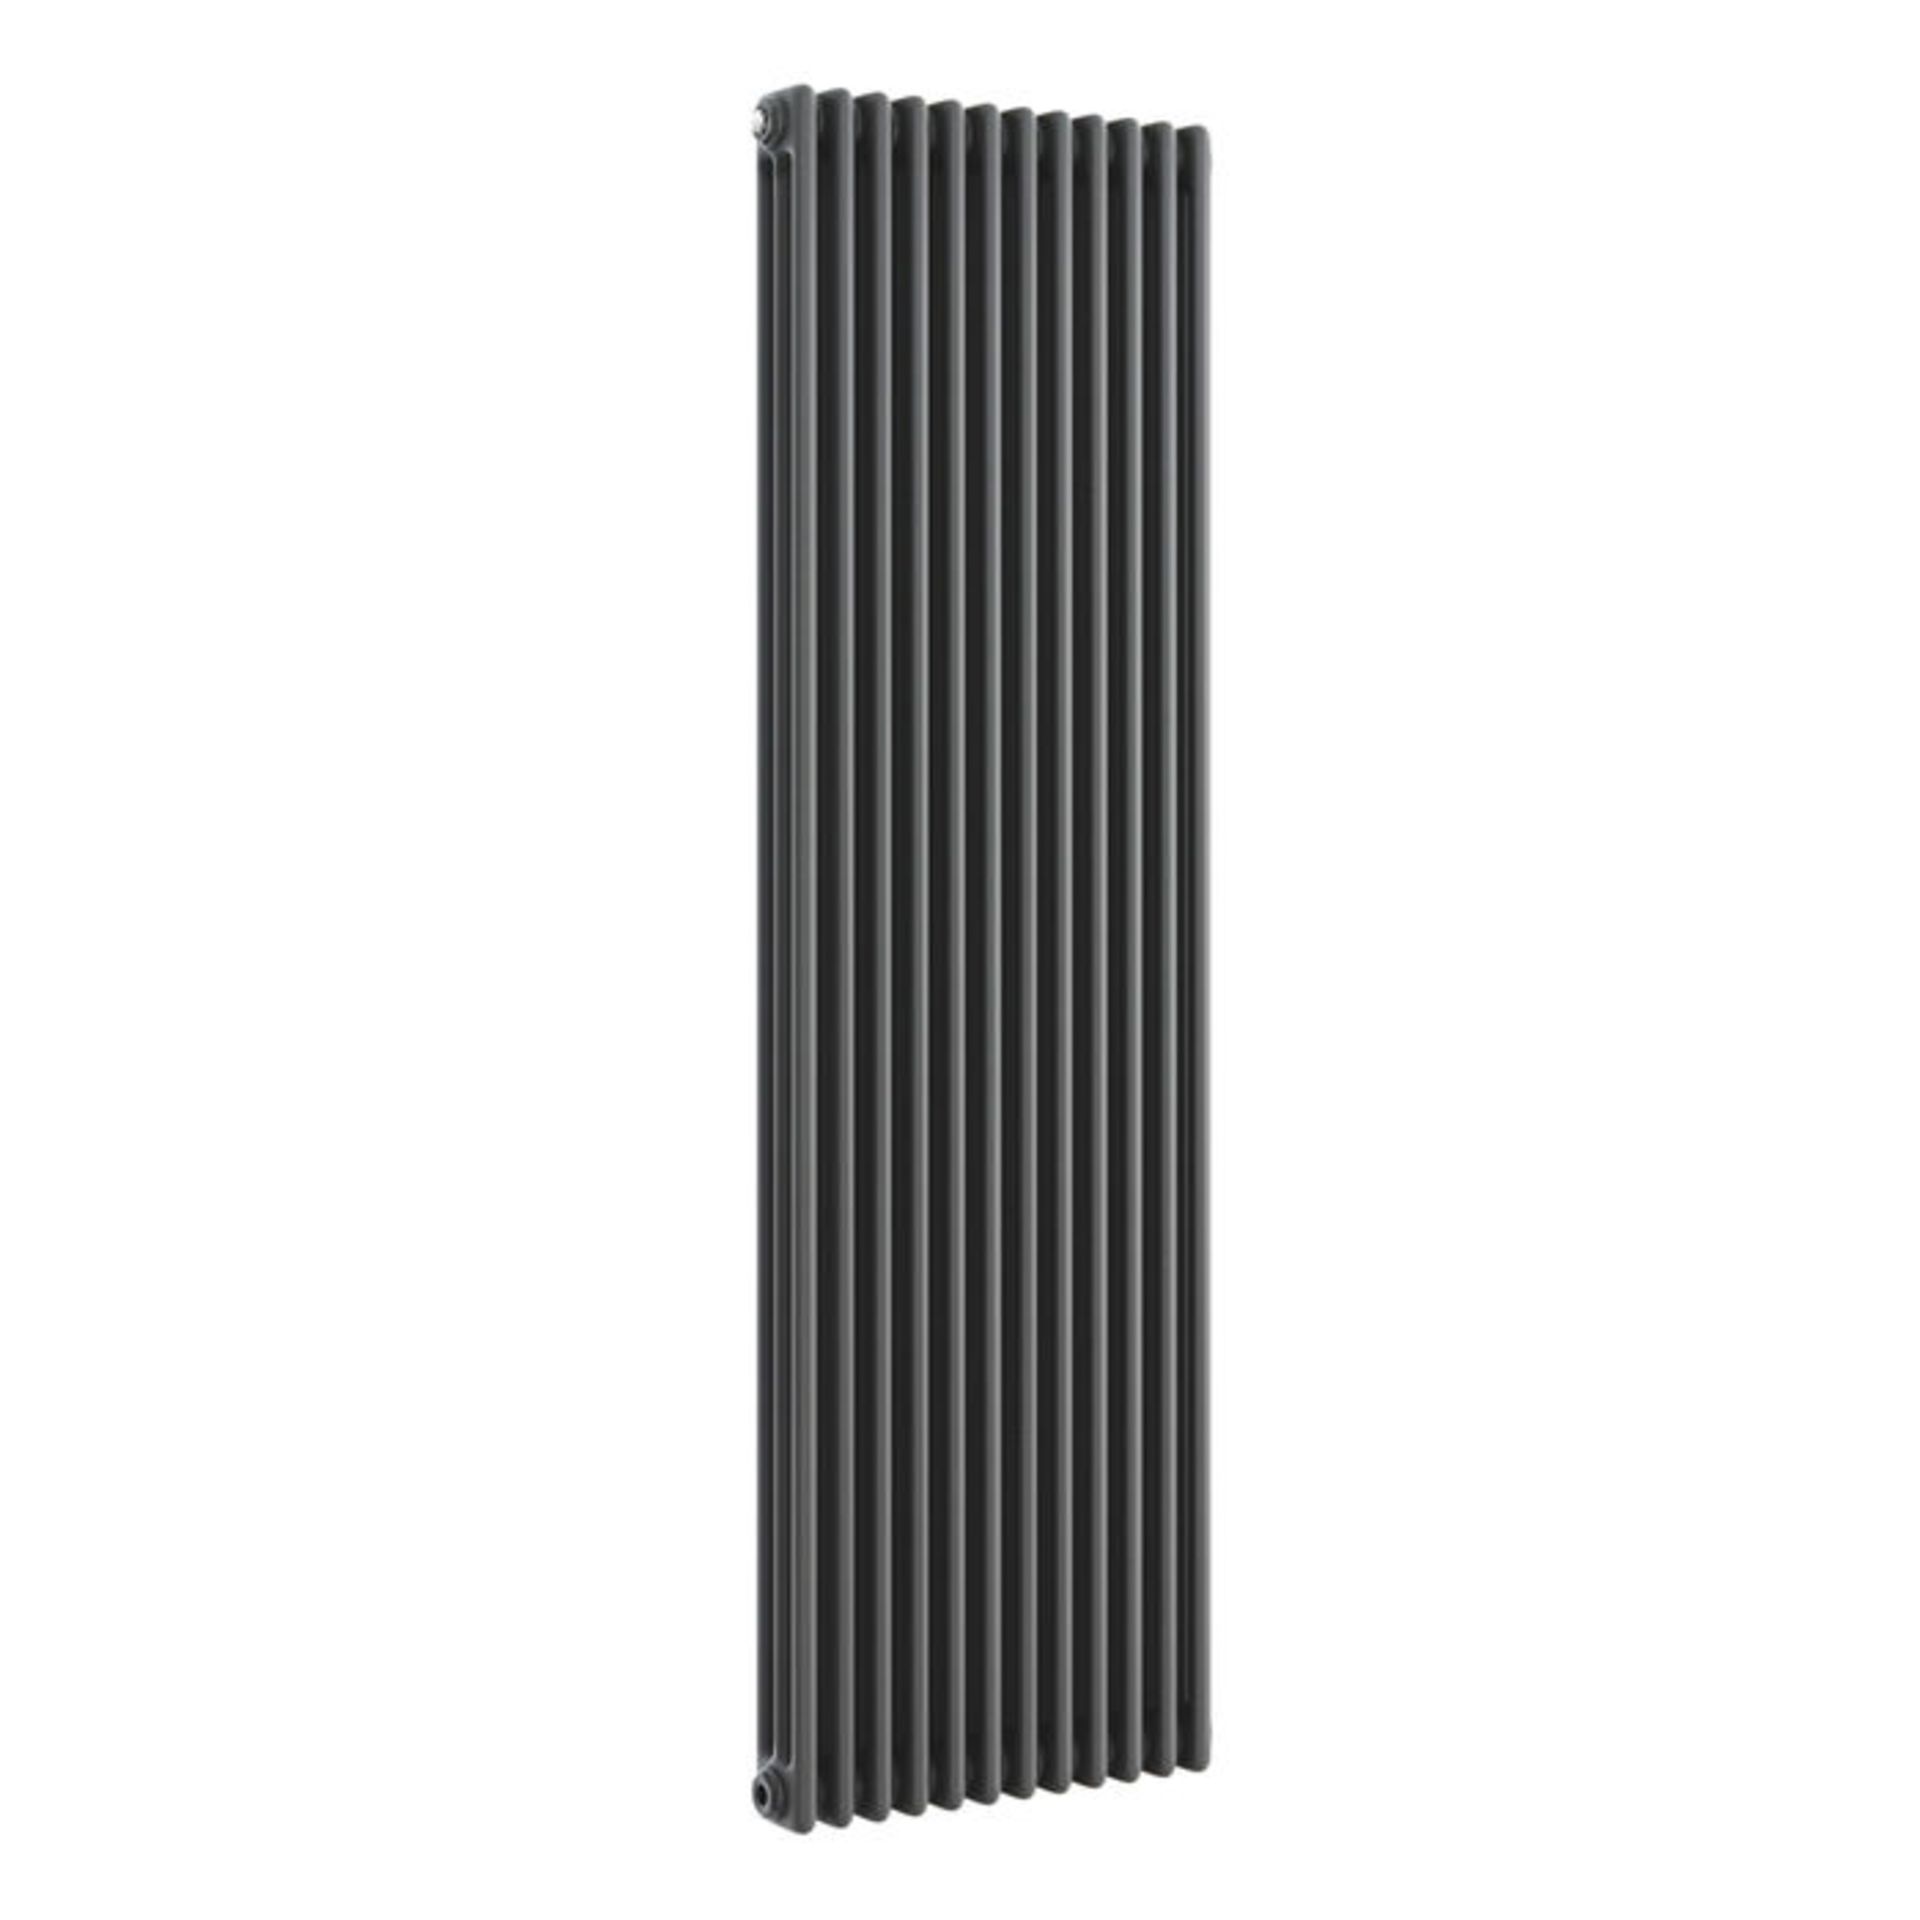 (ED63) 1800x558mm Anthracite Triple Panel Vertical Colosseum Traditional Radiator. RRP £619.99. Made - Image 4 of 4